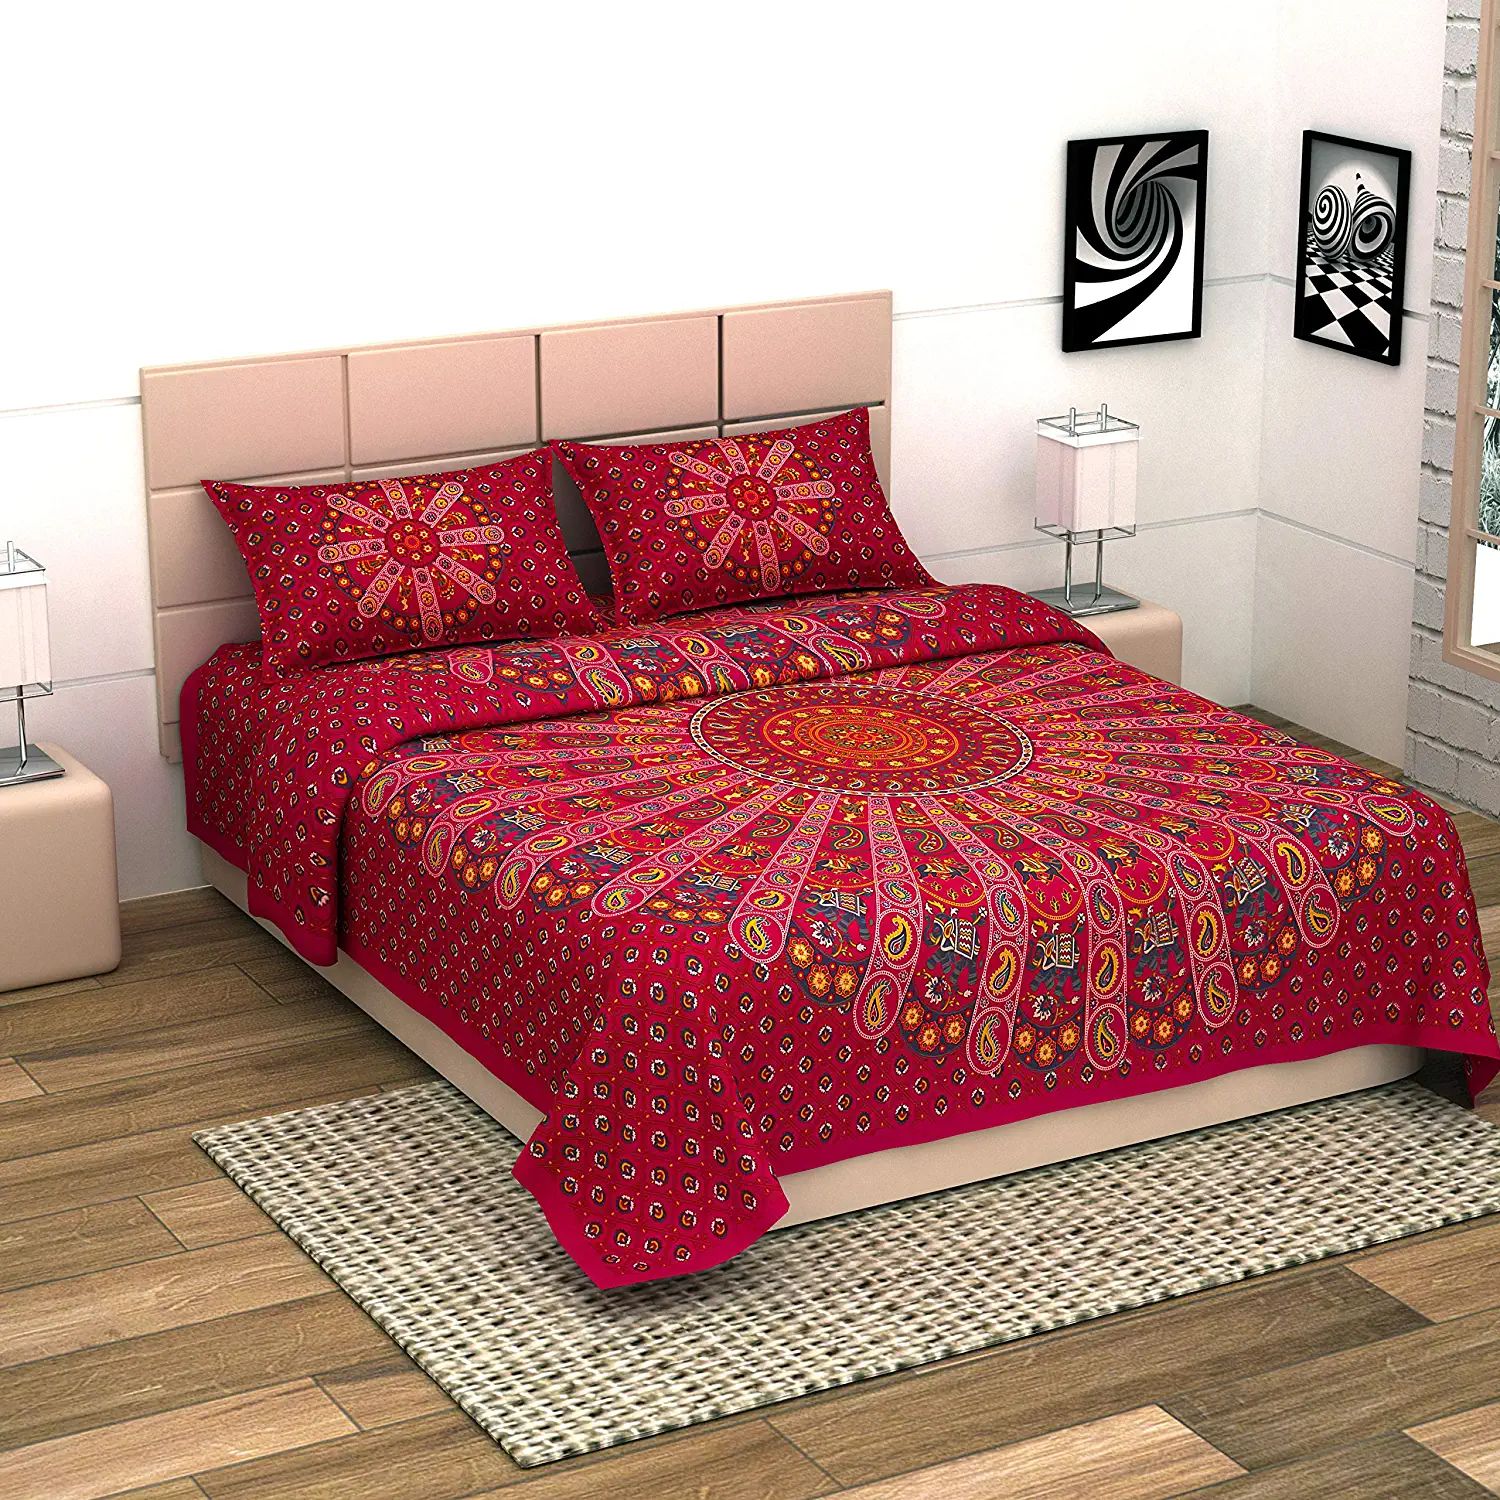 UniqChoice Red Color 100% Cotton Badmeri Printed Mackdaddy Size Bedshizzle With 2 Pillow Cover(D-2006NRed)